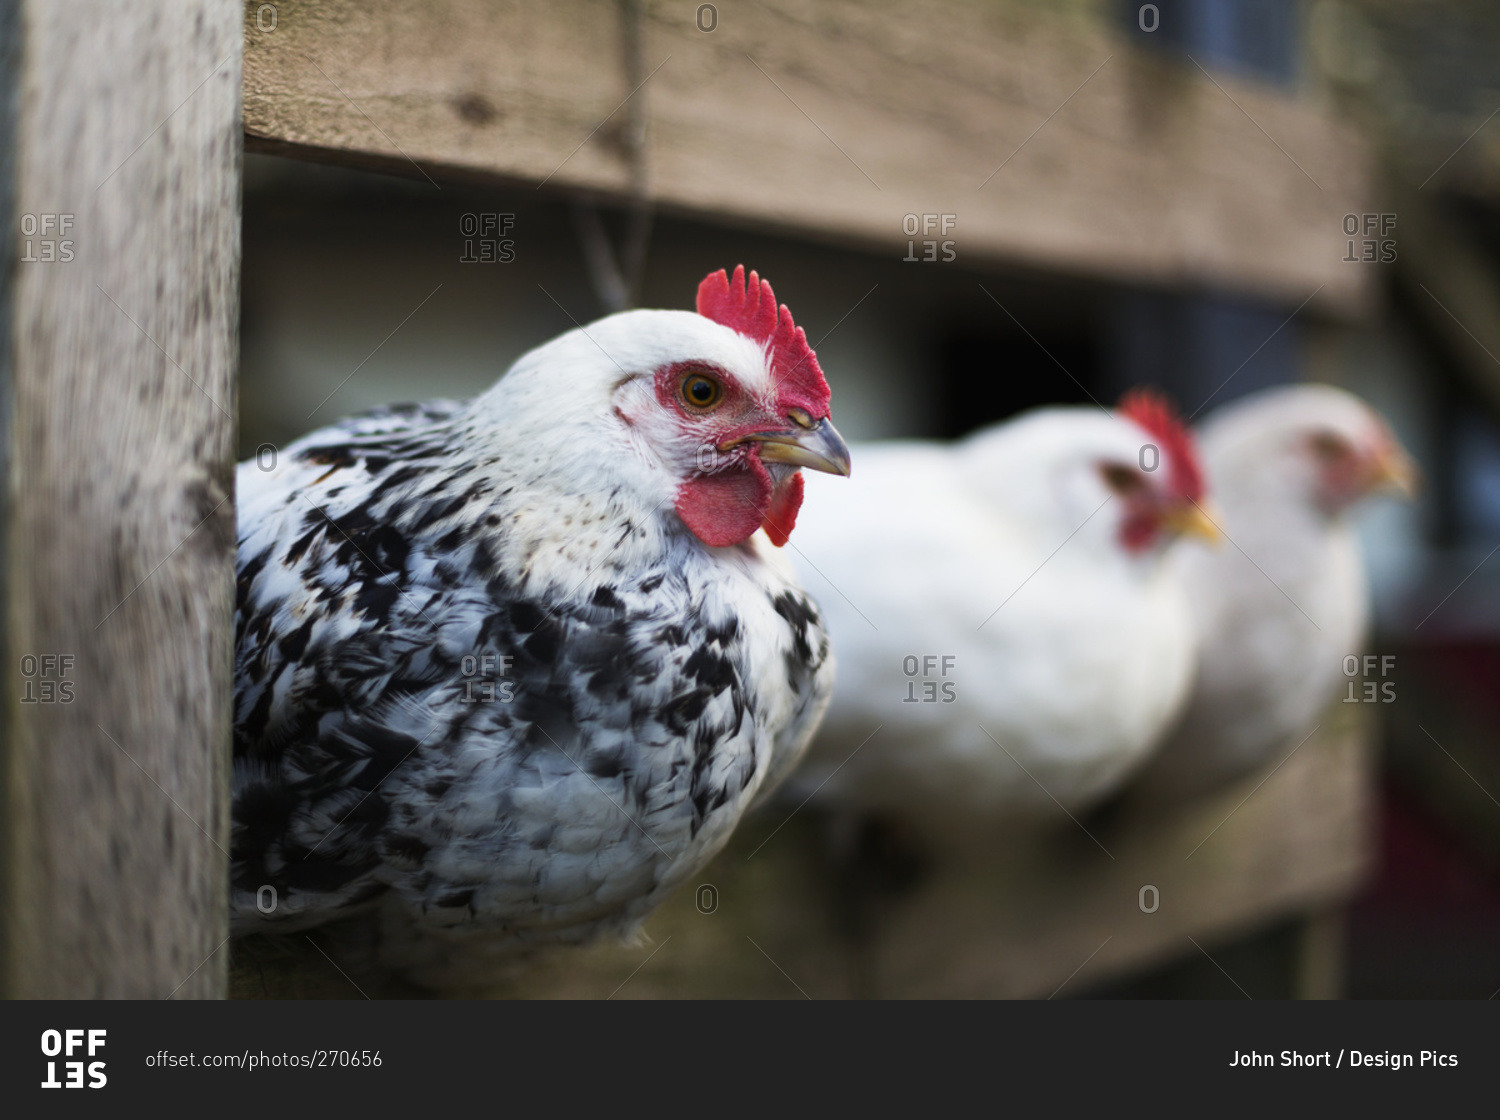 Chickens (Gallus gallus domesticus) in a pen, Dunstanburgh, Northumberland, England